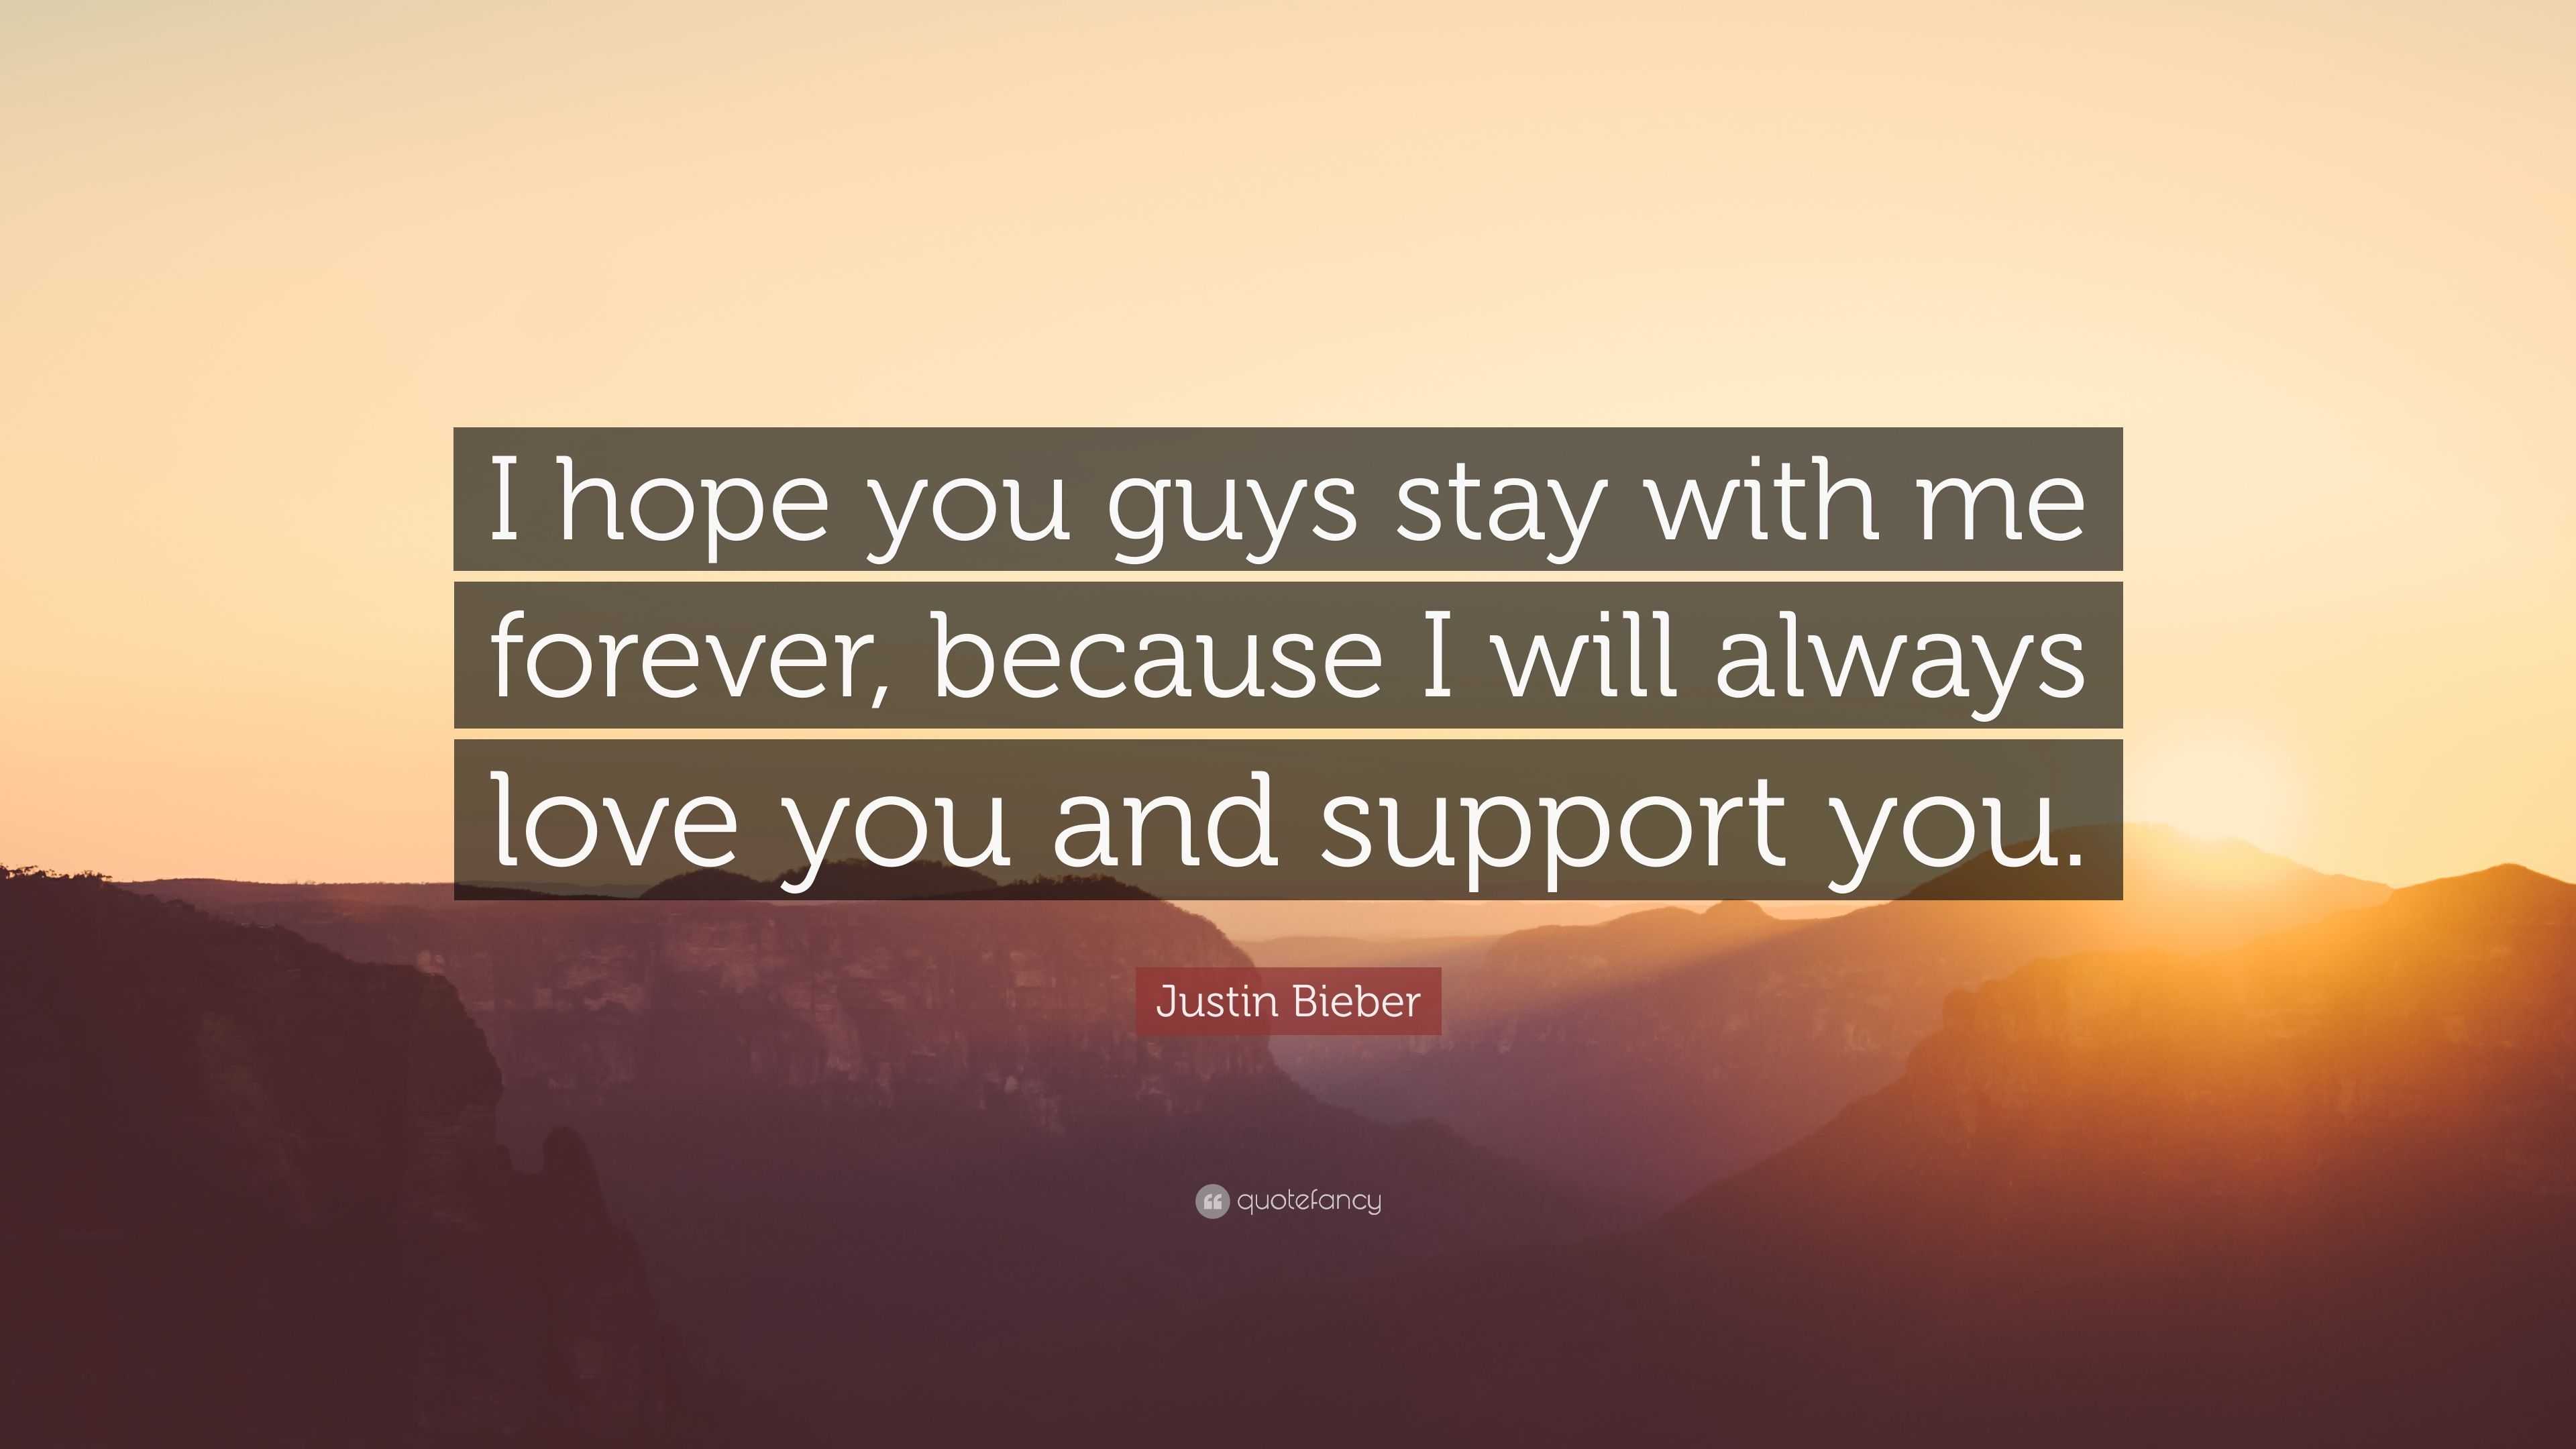 Justin Bieber Quote “I hope you guys stay with me forever because I